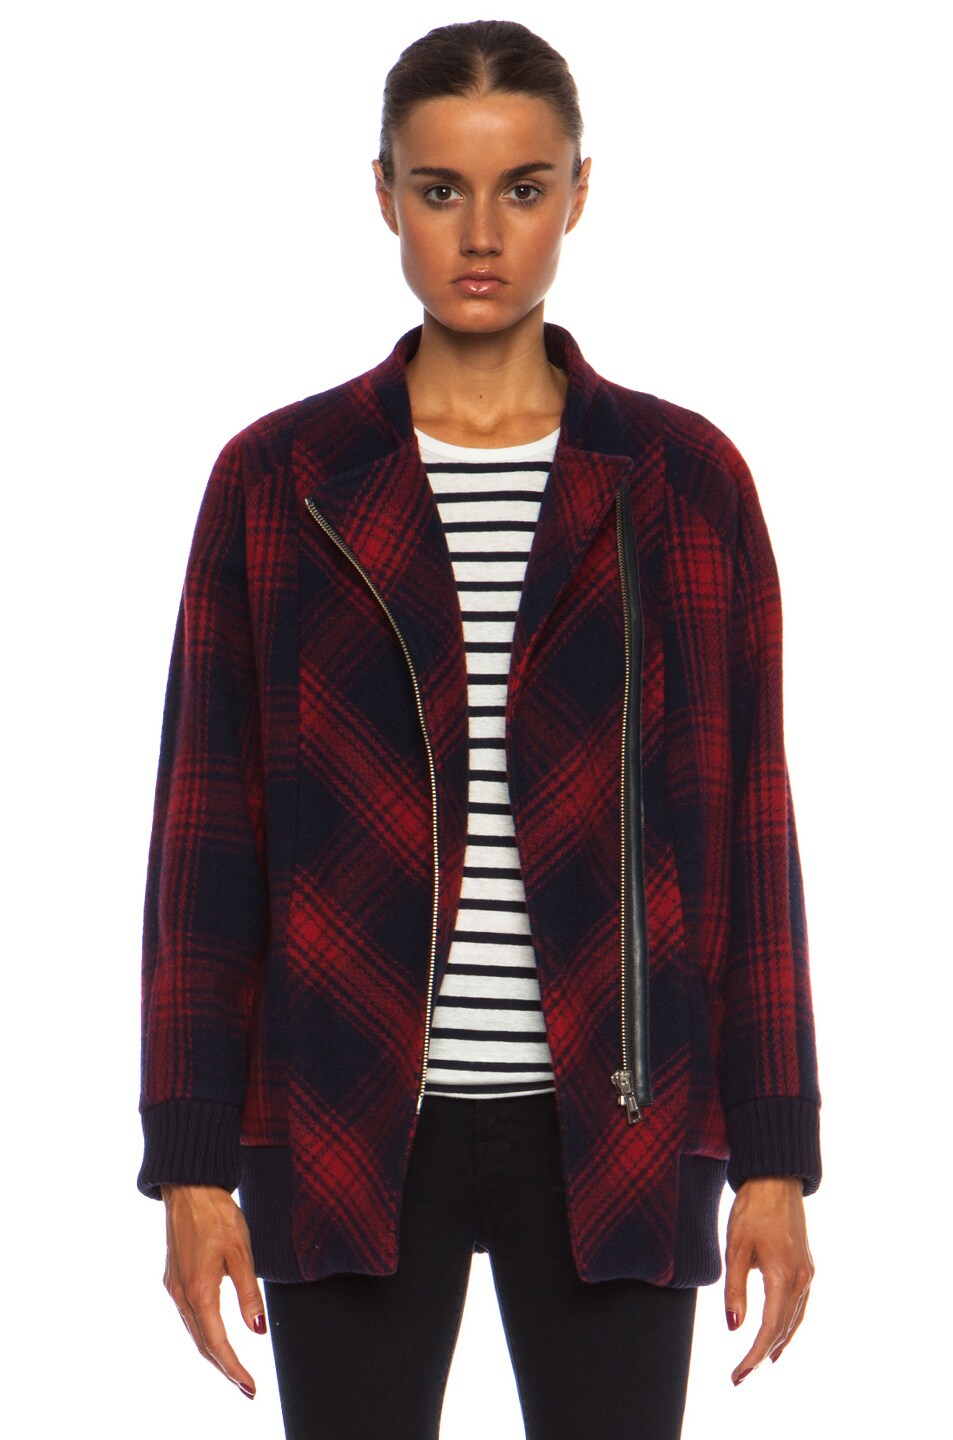 Band of Outsiders Plaid Wool Cacoon Coat in Red & Navy | FWRD